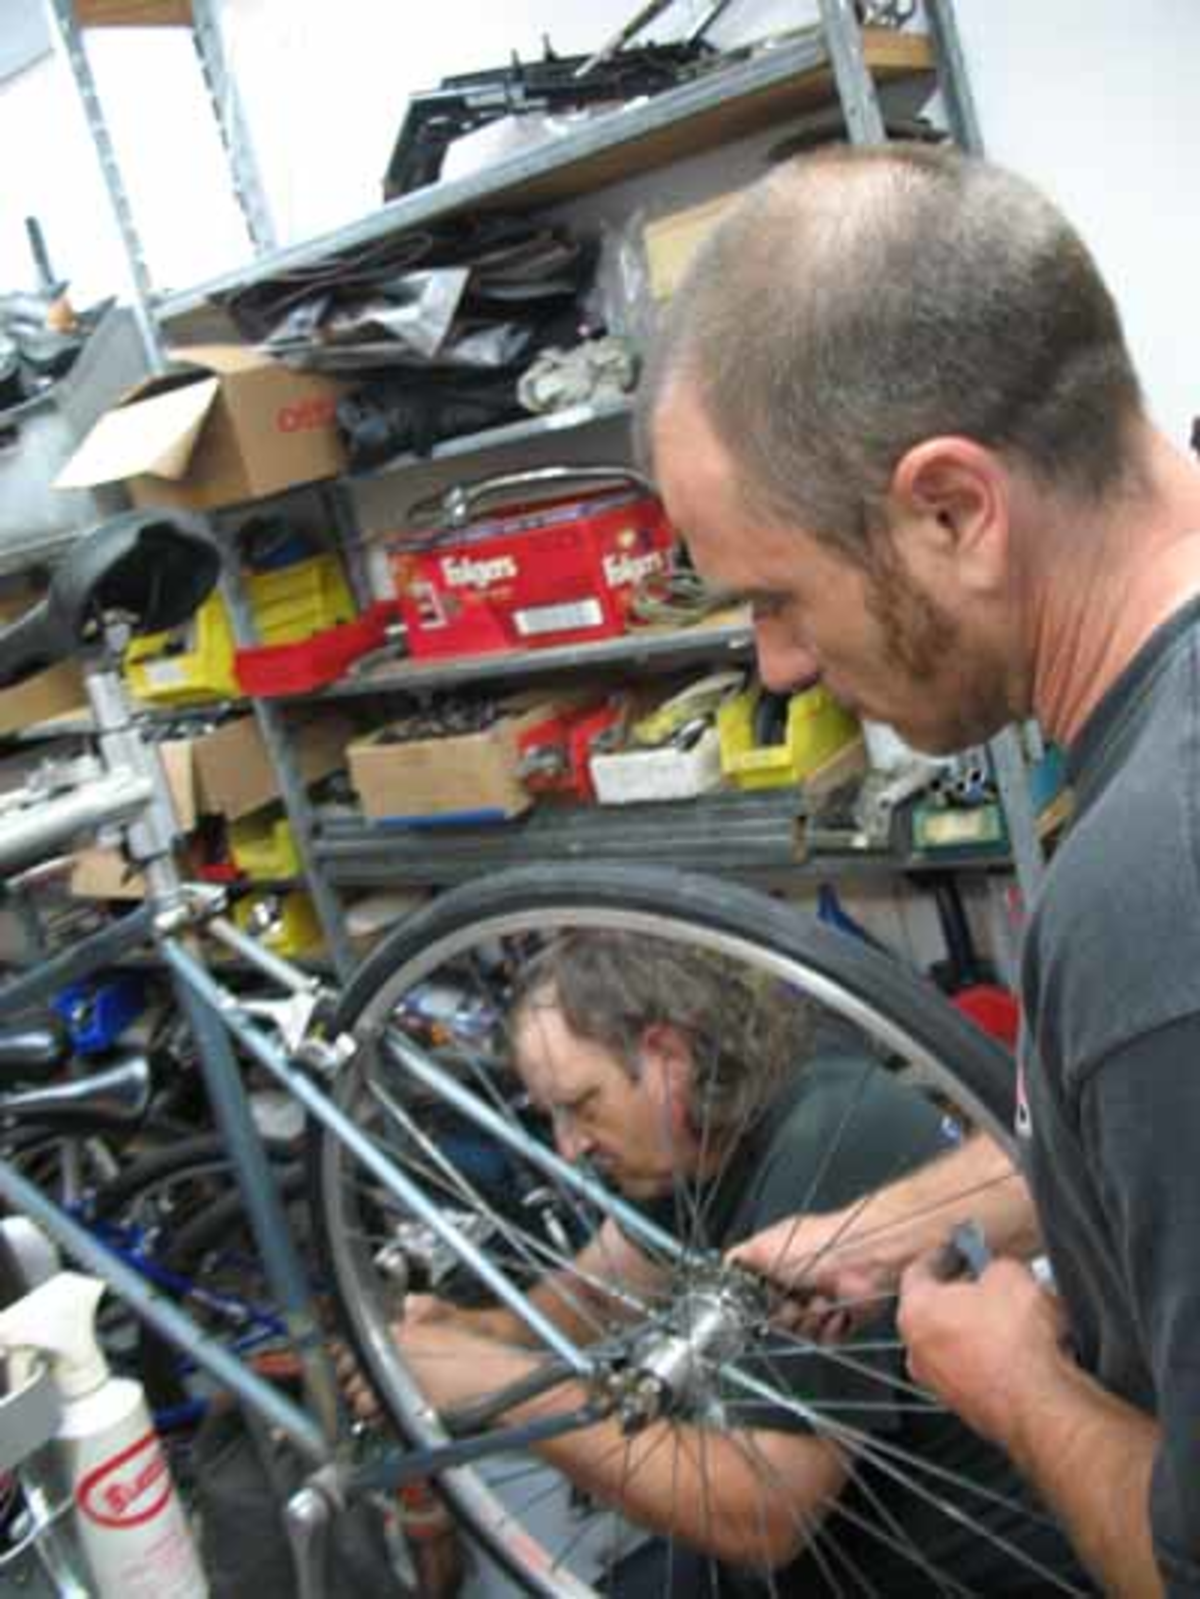 A new (or repaired) set of wheels is the gift of Homeless Emergency Projects Freewheel Program.